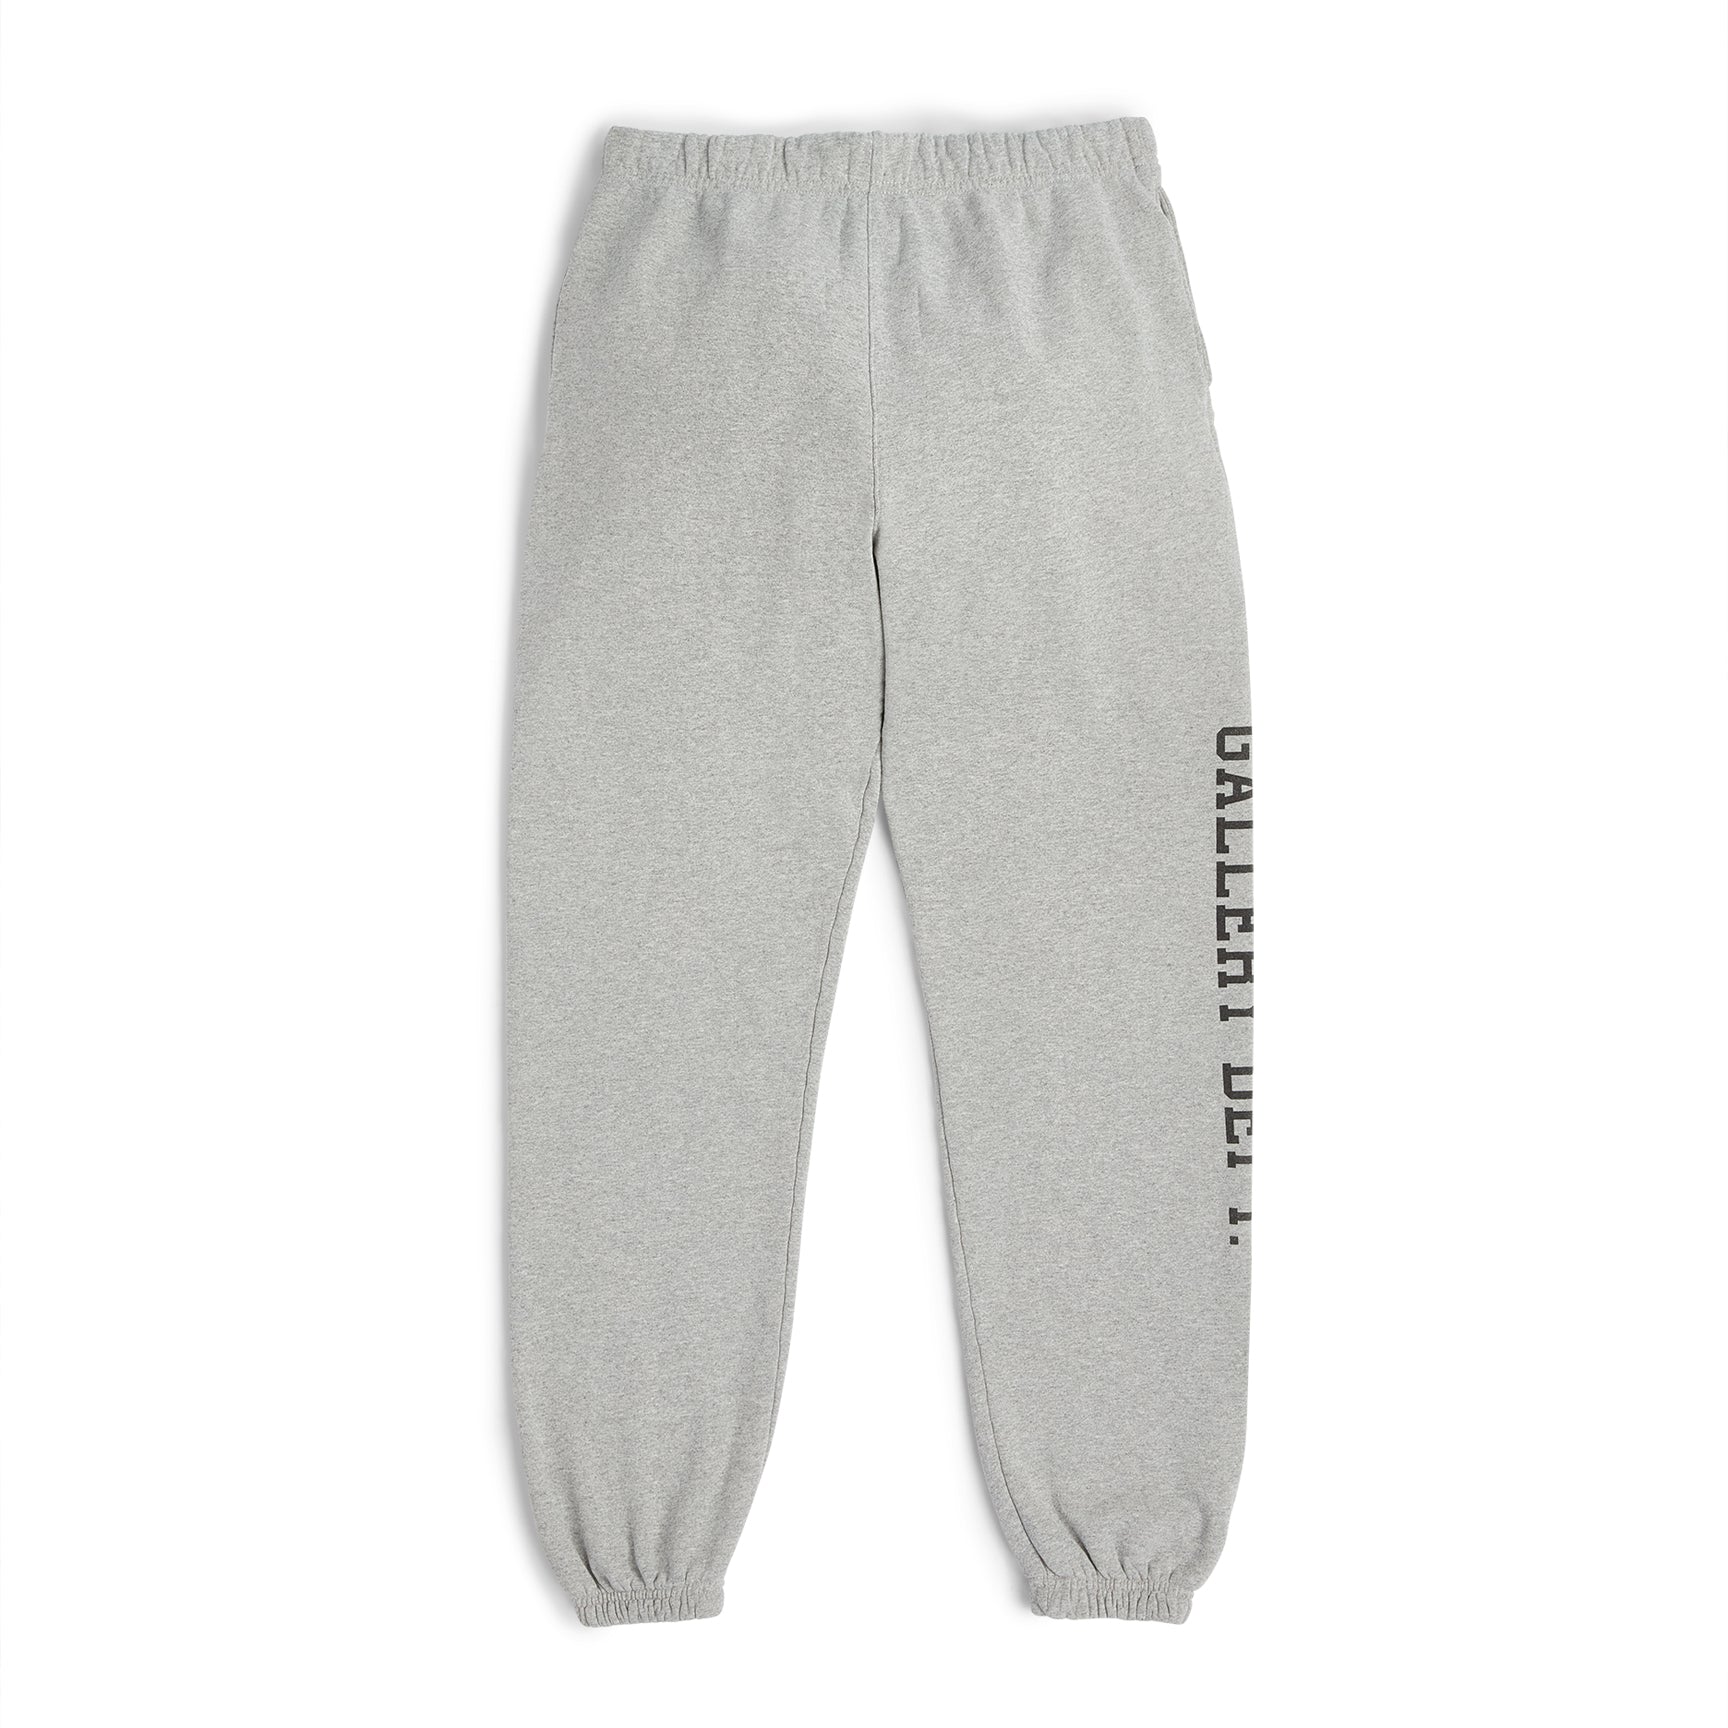 Gallery Dept Large Gray Flare Sweatpants (Authentic) 